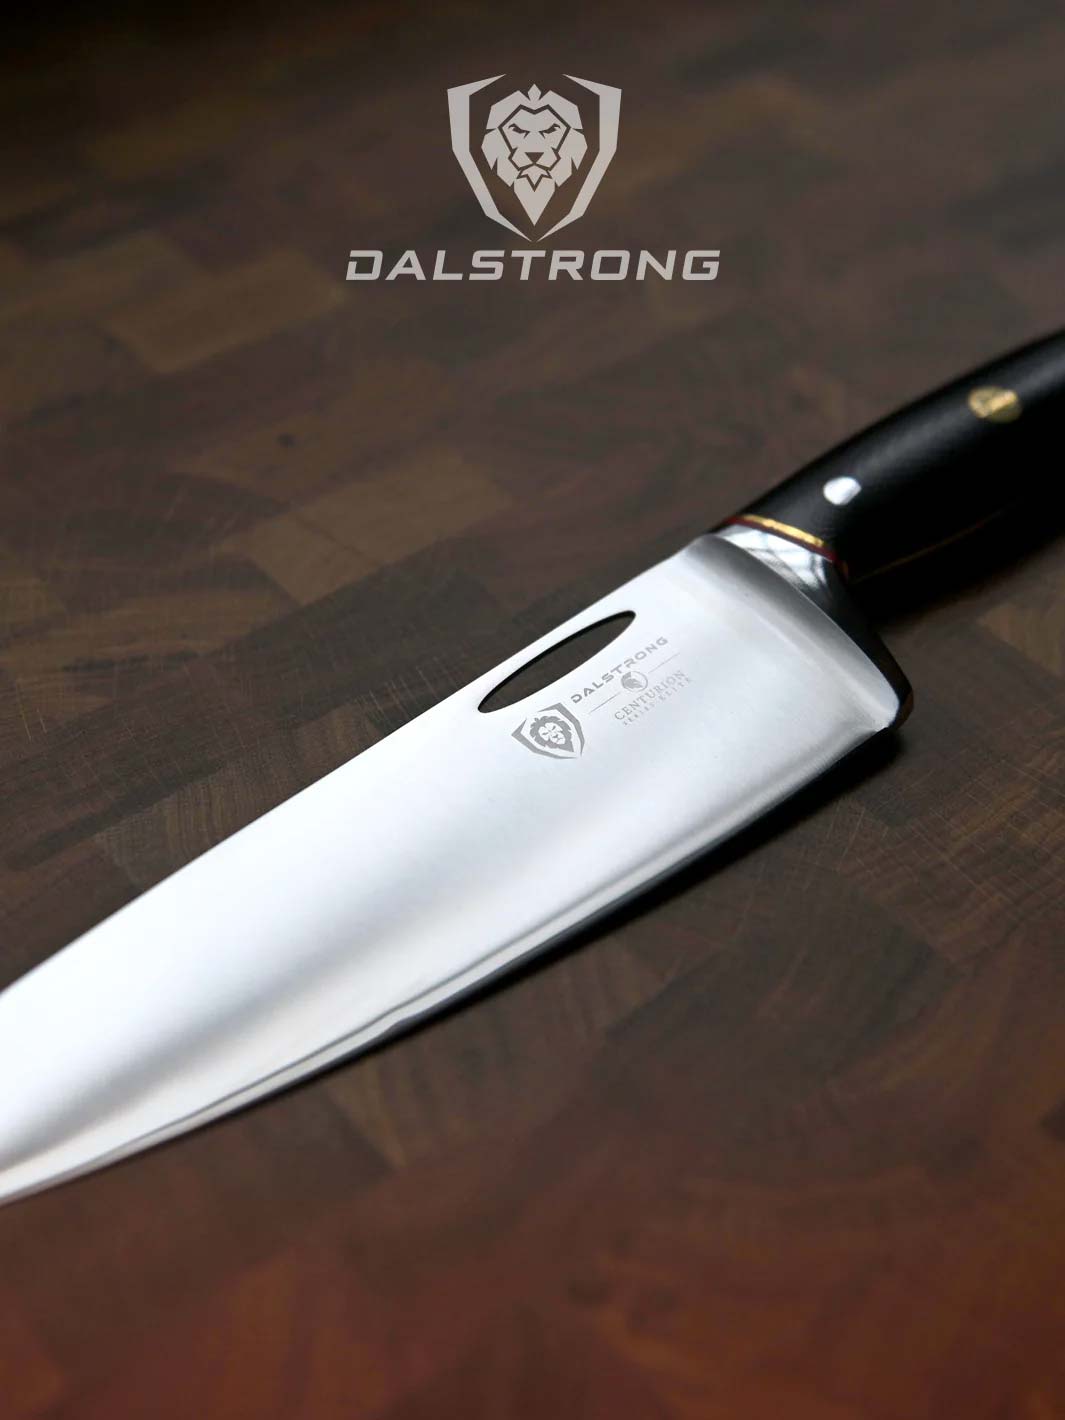 Dalstrong centurion series 8 inch chef knife with black handle on a cutting board.